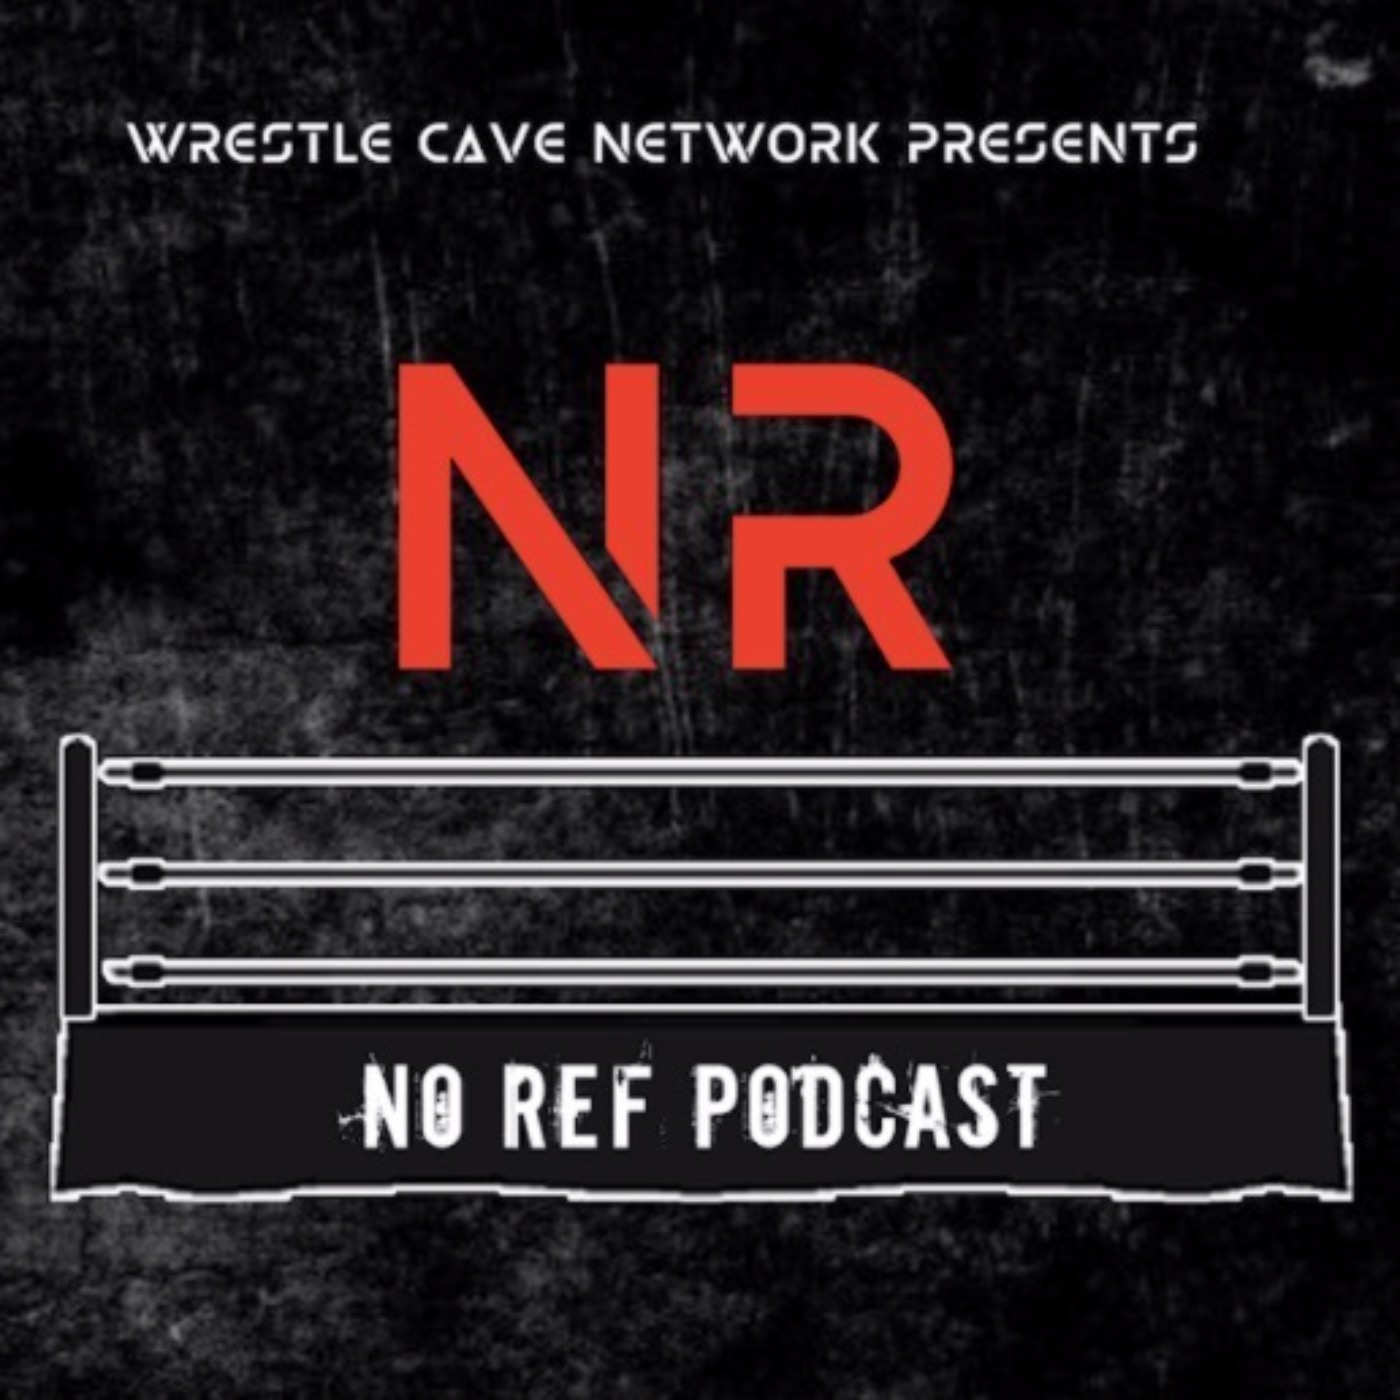 Wrestle Cave Network Presents: No Ref Podcast "The Getback"